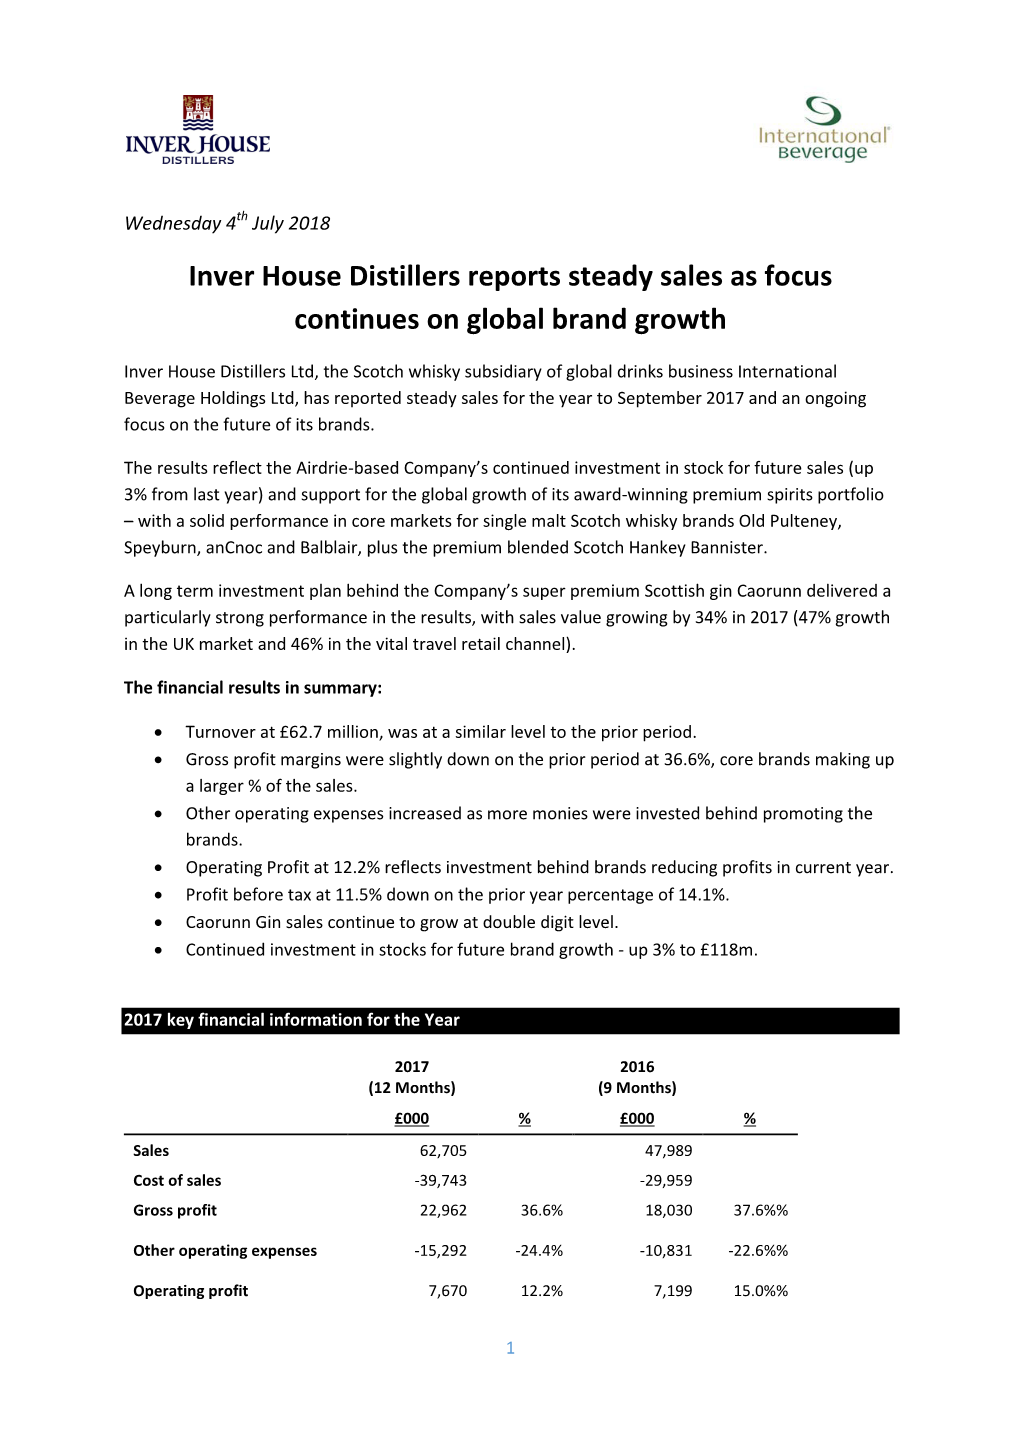 Inver House Distillers Reports Steady Sales As Focus Continues on Global Brand Growth